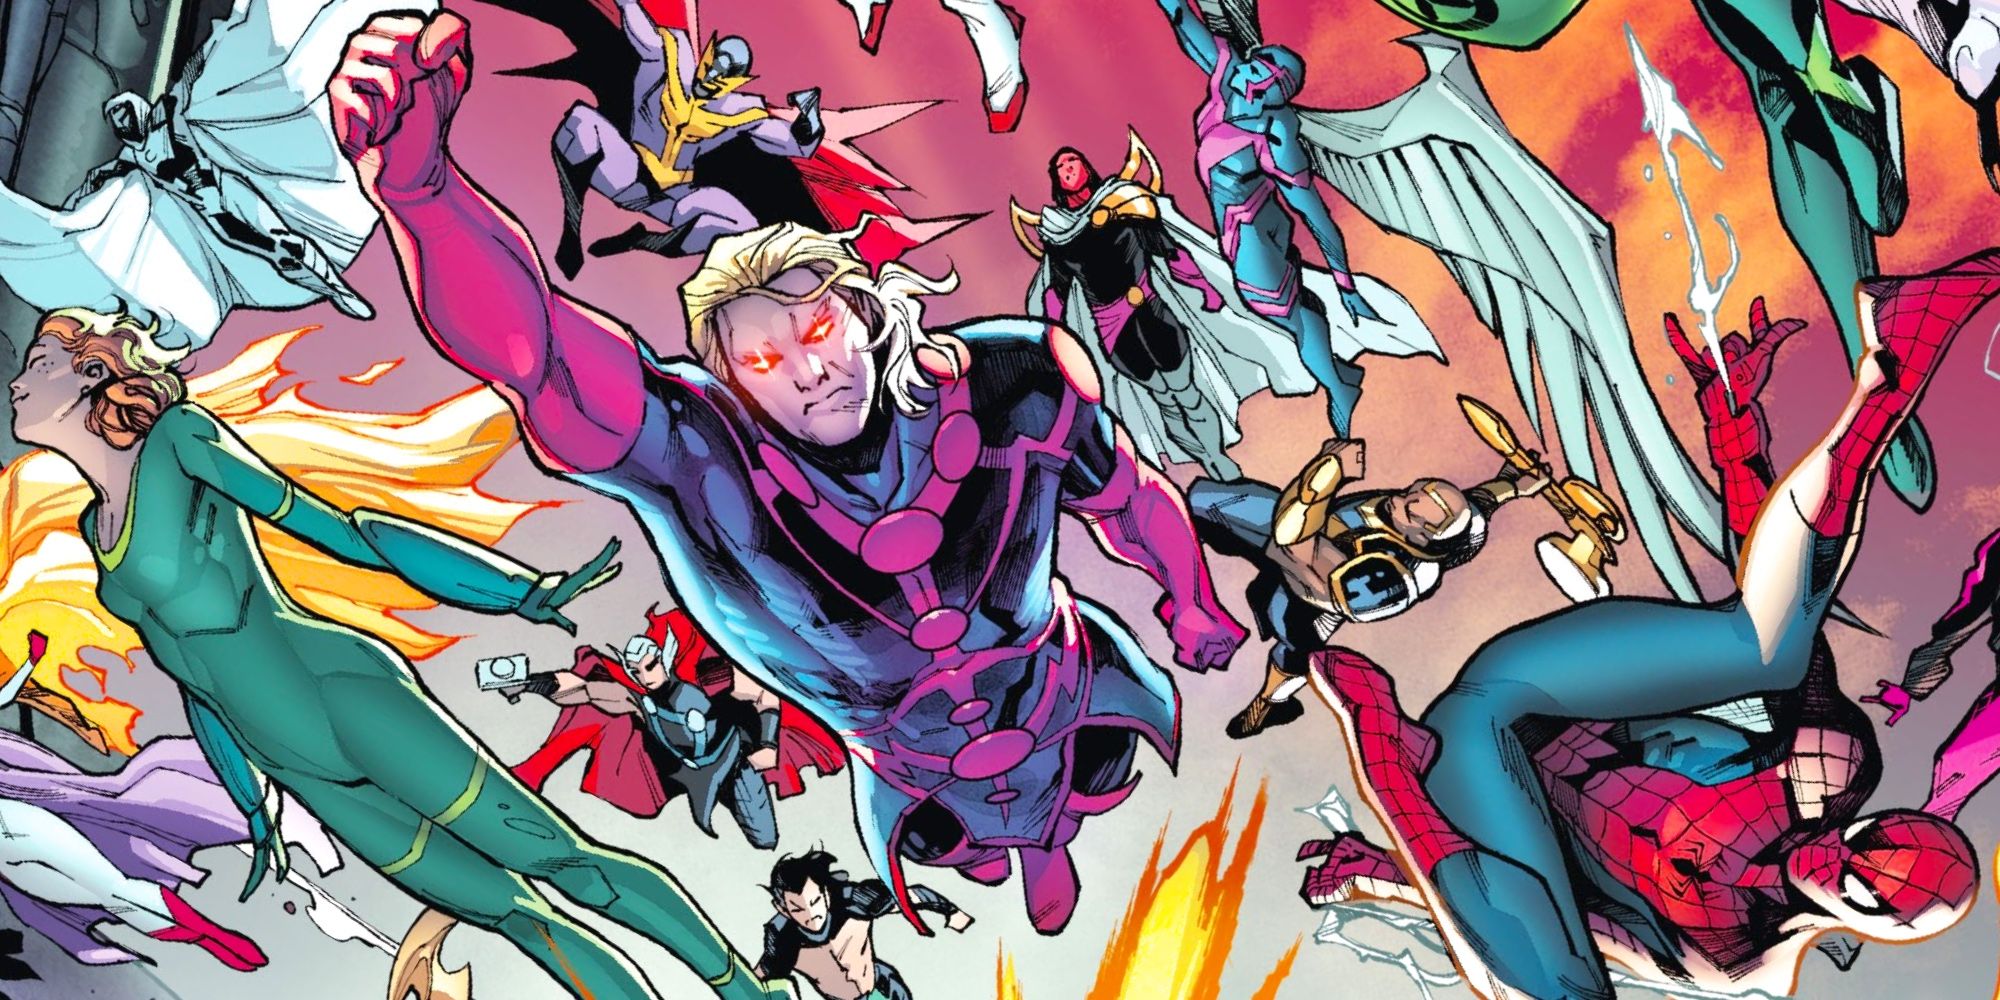 The Eternals, X-Men, and Avengers in Marvel's Judgment Day #5